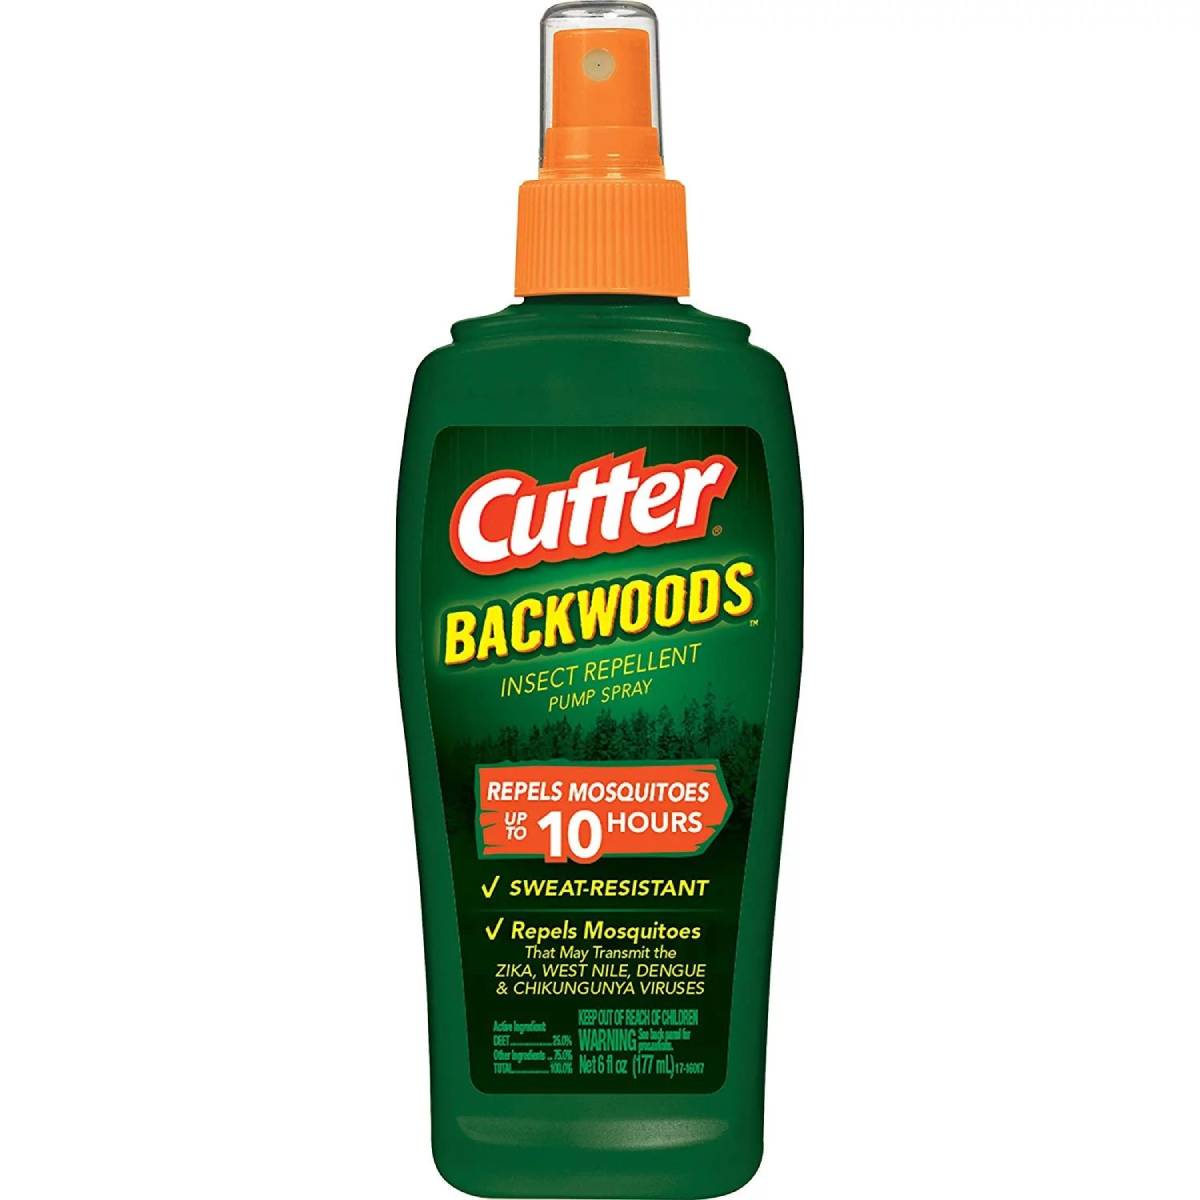 Cutter Backwoods™ 6oz Insect Repellent Pump Spray